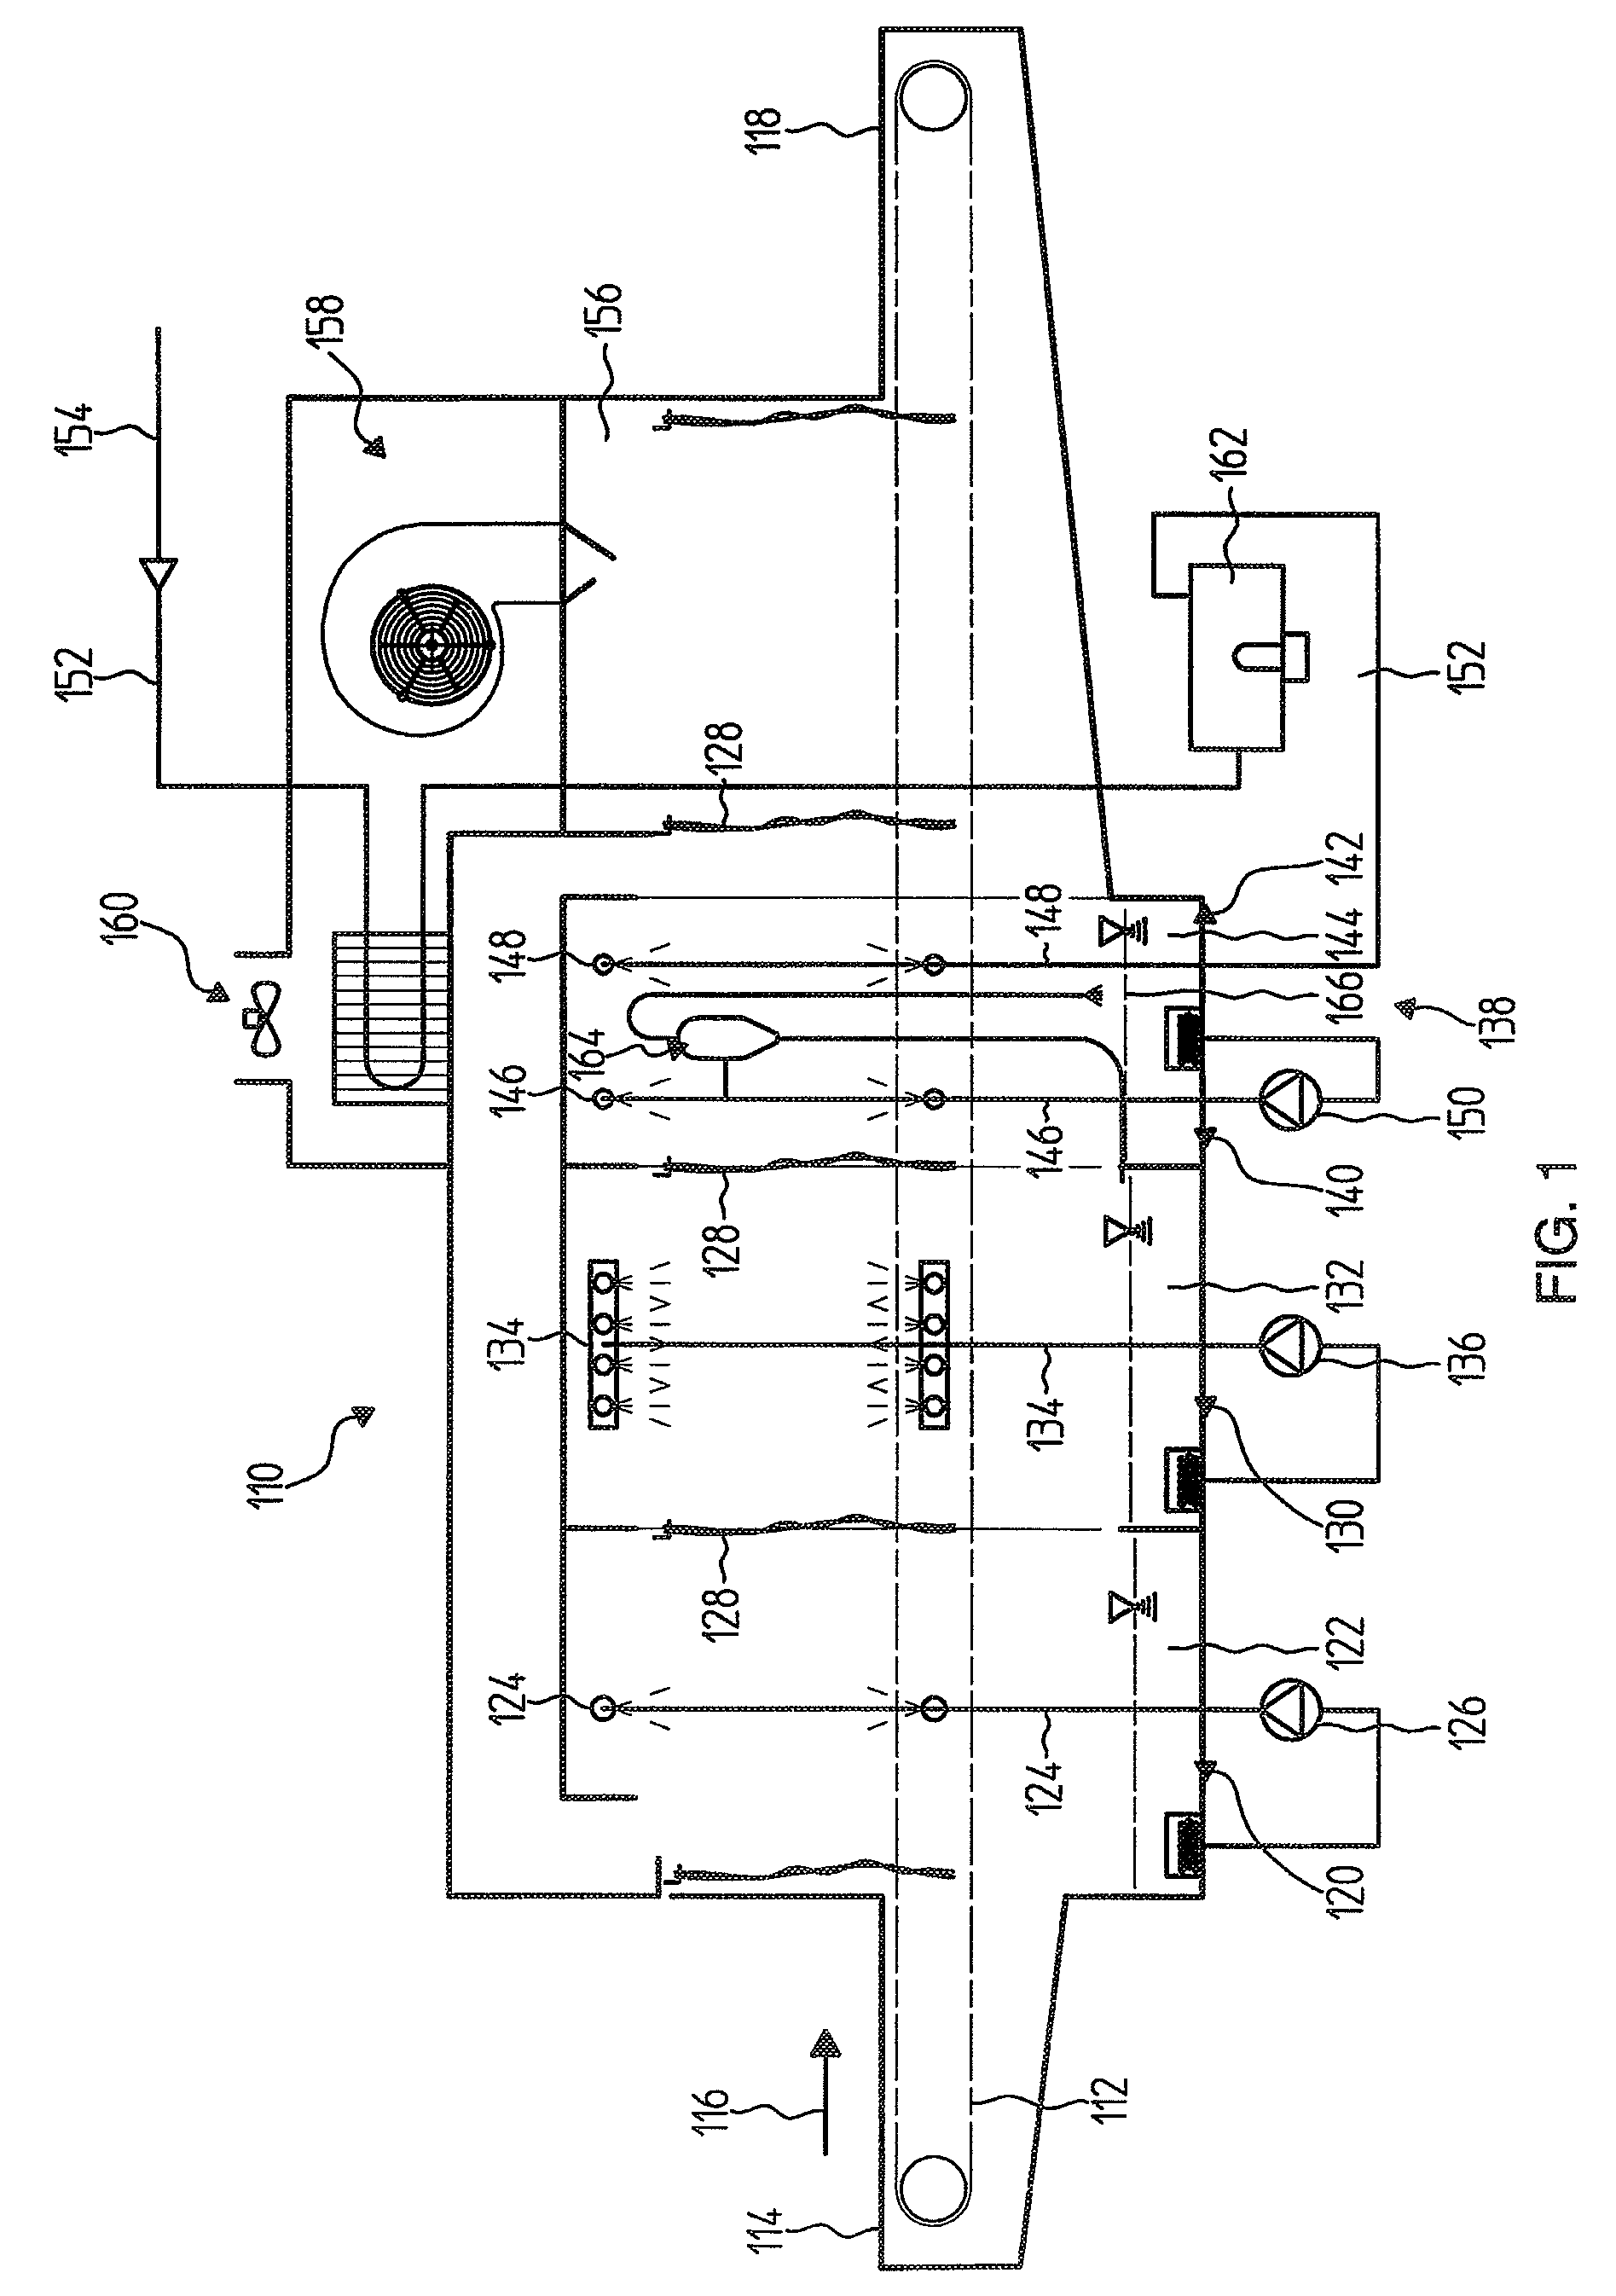 Dirt separator device with level control